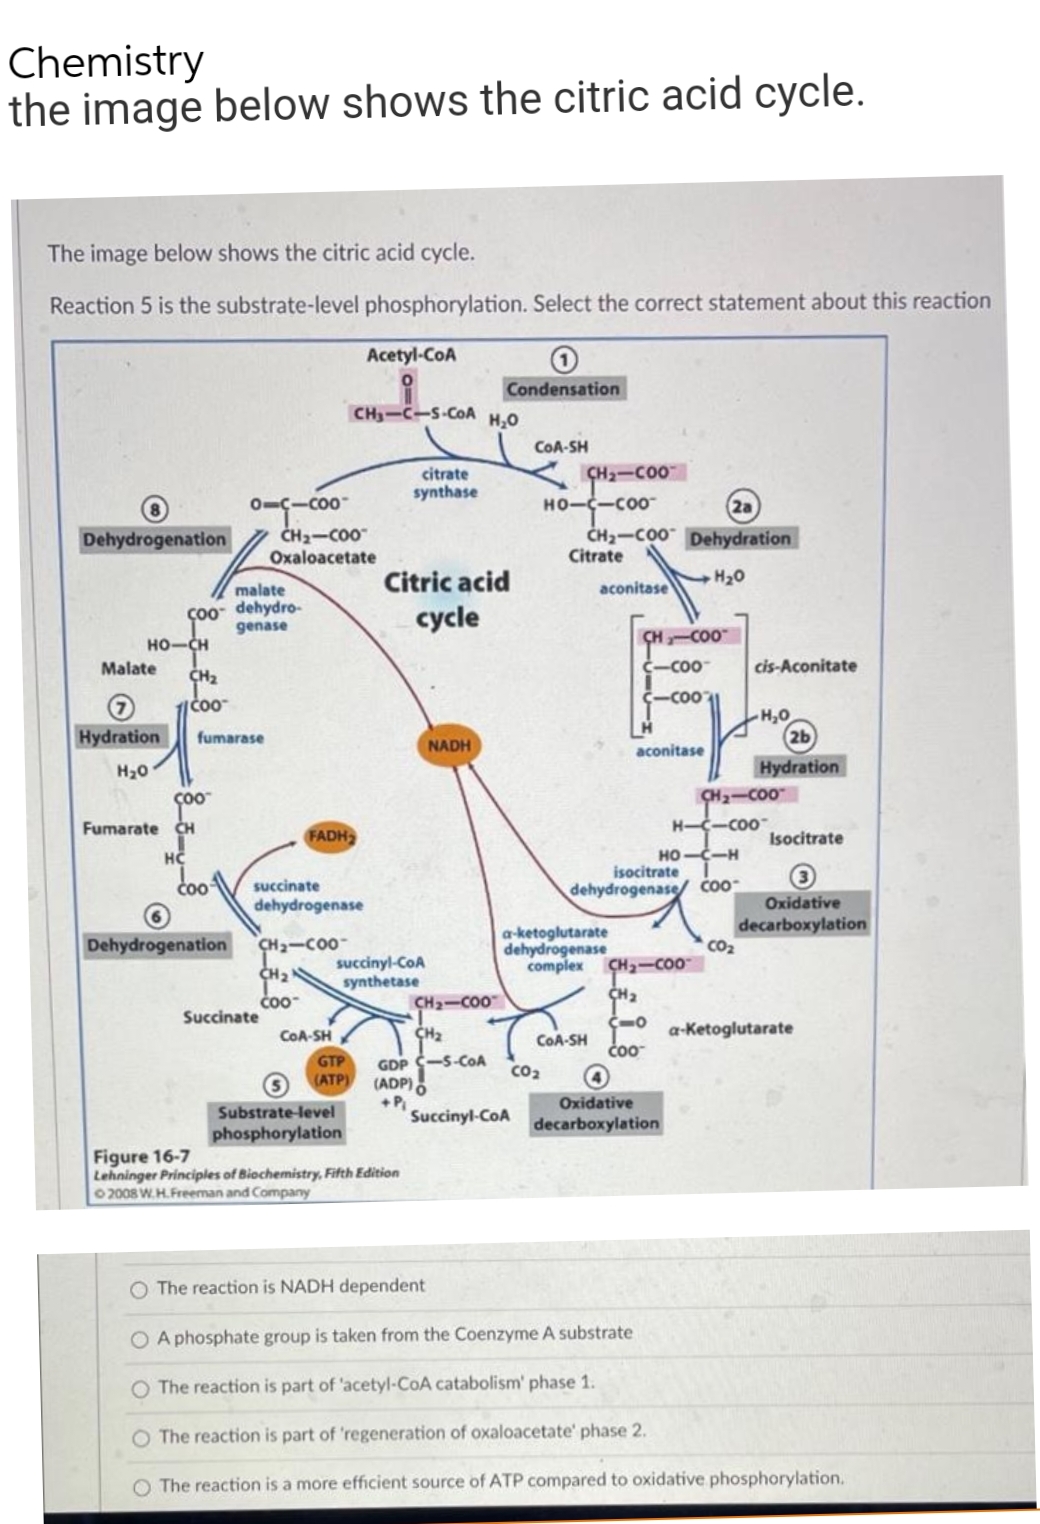 Chemistry
the image below shows the citric acid cycle.
The image below shows the citric acid cycle.
Reaction 5 is the substrate-level phosphorylation. Select the correct statement about this reaction
Acetyl-CoA
Condensation
CH₂-C-S-CoA H₂O
CoA-SH
citrate
CH₂-COO™
synthase
011000
HO-C-COO™
(2a
CH₂-COO Dehydration
Dehydrogenation
Citrate
Citric acid
H₂O
aconitase
cycle
NADH
malate
Coo- dehydro-
genase
HO-CH
Malate
COO™
Hydration fumarase
H₂O
COO™
Fumarate CH
HC
coo
Dehydrogenation
CH₂
CH₂-COO
Oxaloacetate
FADH₂
succinate
dehydrogenase
CH₂-COO
CH₂
COO-
Succinate
succinyl-CoA
synthetase
Succinyl-CoA
CH-COO™
c-coo
c-c0011
aconitase
CO₂
cis-Aconitate
H₂O
(2b
Hydration
Isocitrate
Oxidative
decarboxylation
a-ketoglutarate
dehydrogenase
complex
CH₂-COO™
COA-SH
CH₂
CoA-SH
GTP
GDP C-5-CoA
(ATP)
(ADP)
+ P₁
Substrate-level
Oxidative
decarboxylation
phosphorylation
Figure 16-7
Lehninger Principles of Biochemistry, Fifth Edition
2008 W.H. Freeman and Company
O The reaction is NADH dependent
O A phosphate group is taken from the Coenzyme A substrate
O The reaction is part of 'acetyl-CoA catabolism' phase 1.
O The reaction is part of 'regeneration of oxaloacetate' phase 2.
O The reaction is a more efficient source of ATP compared to oxidative phosphorylation.
CH₂-COO™
H-C-COO™
HO-CH
isocitrate
dehydrogenase Coo
CO₂
CH₂-COO
CH₂
-a-ketoglutarate
COO™